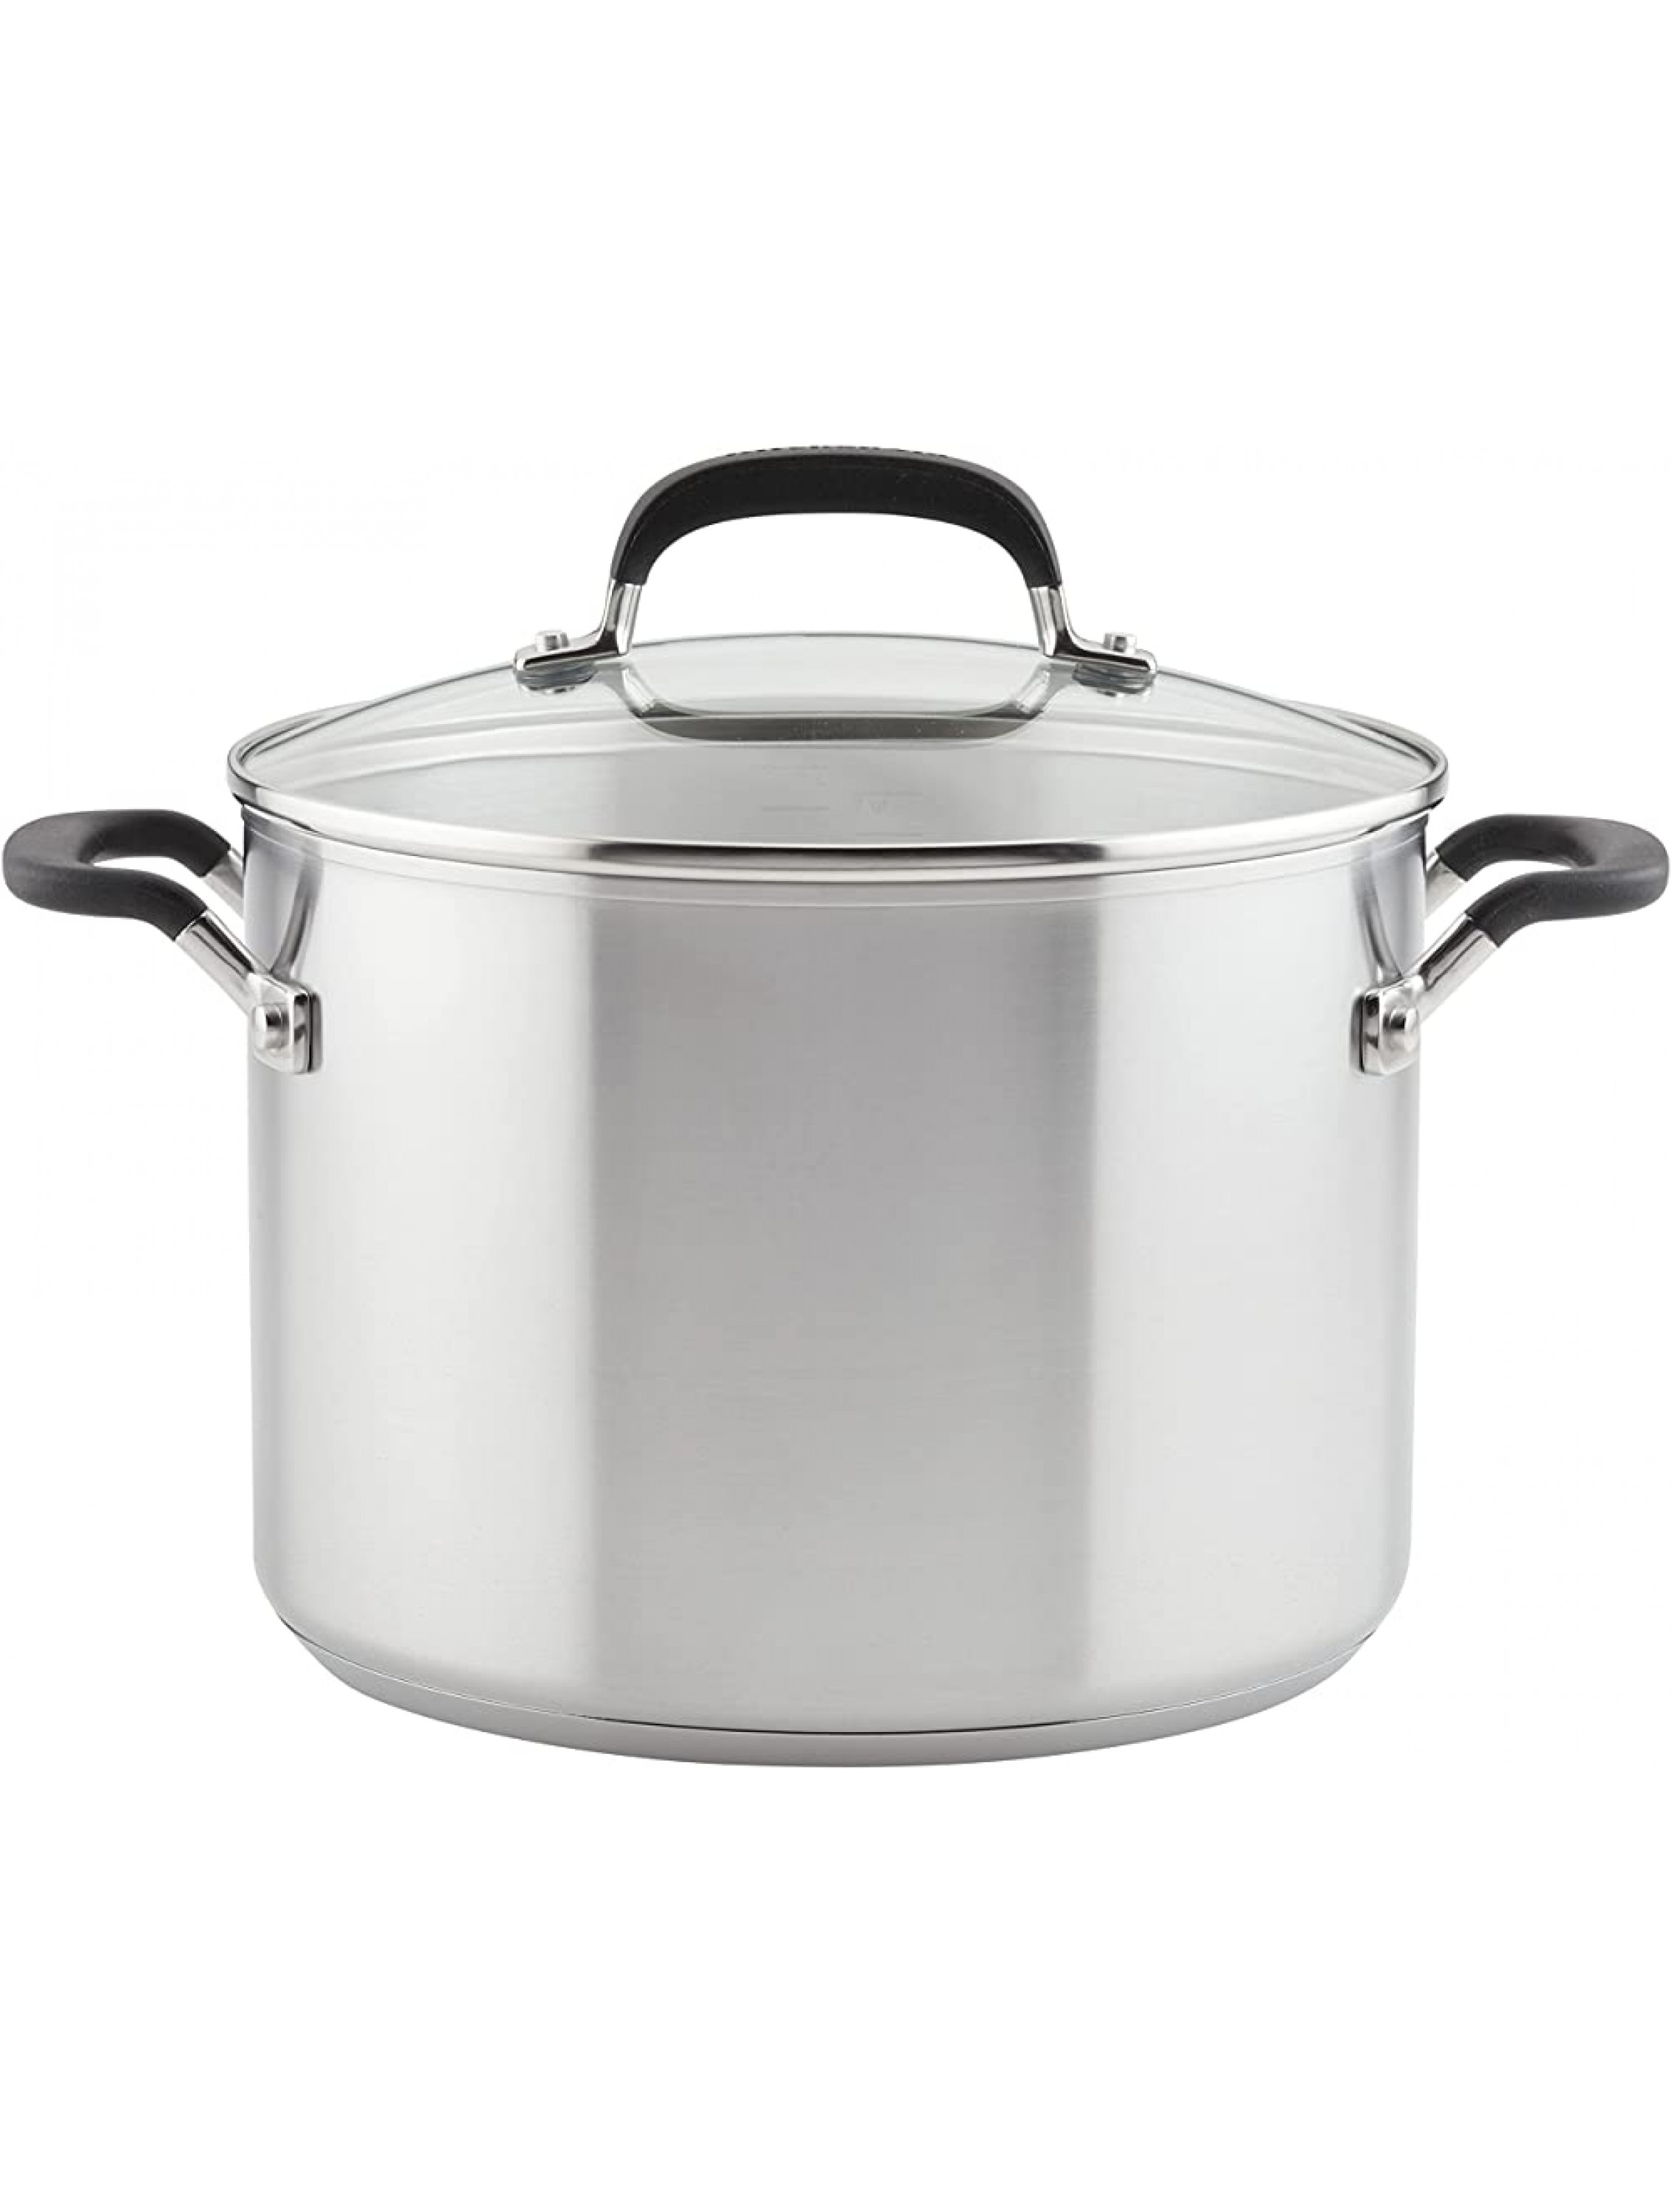 KitchenAid Stainless Steel Stockpot with Measuring Marks and Lid 8 Quart Brushed Stainless Steel - BD1ADLBJ1